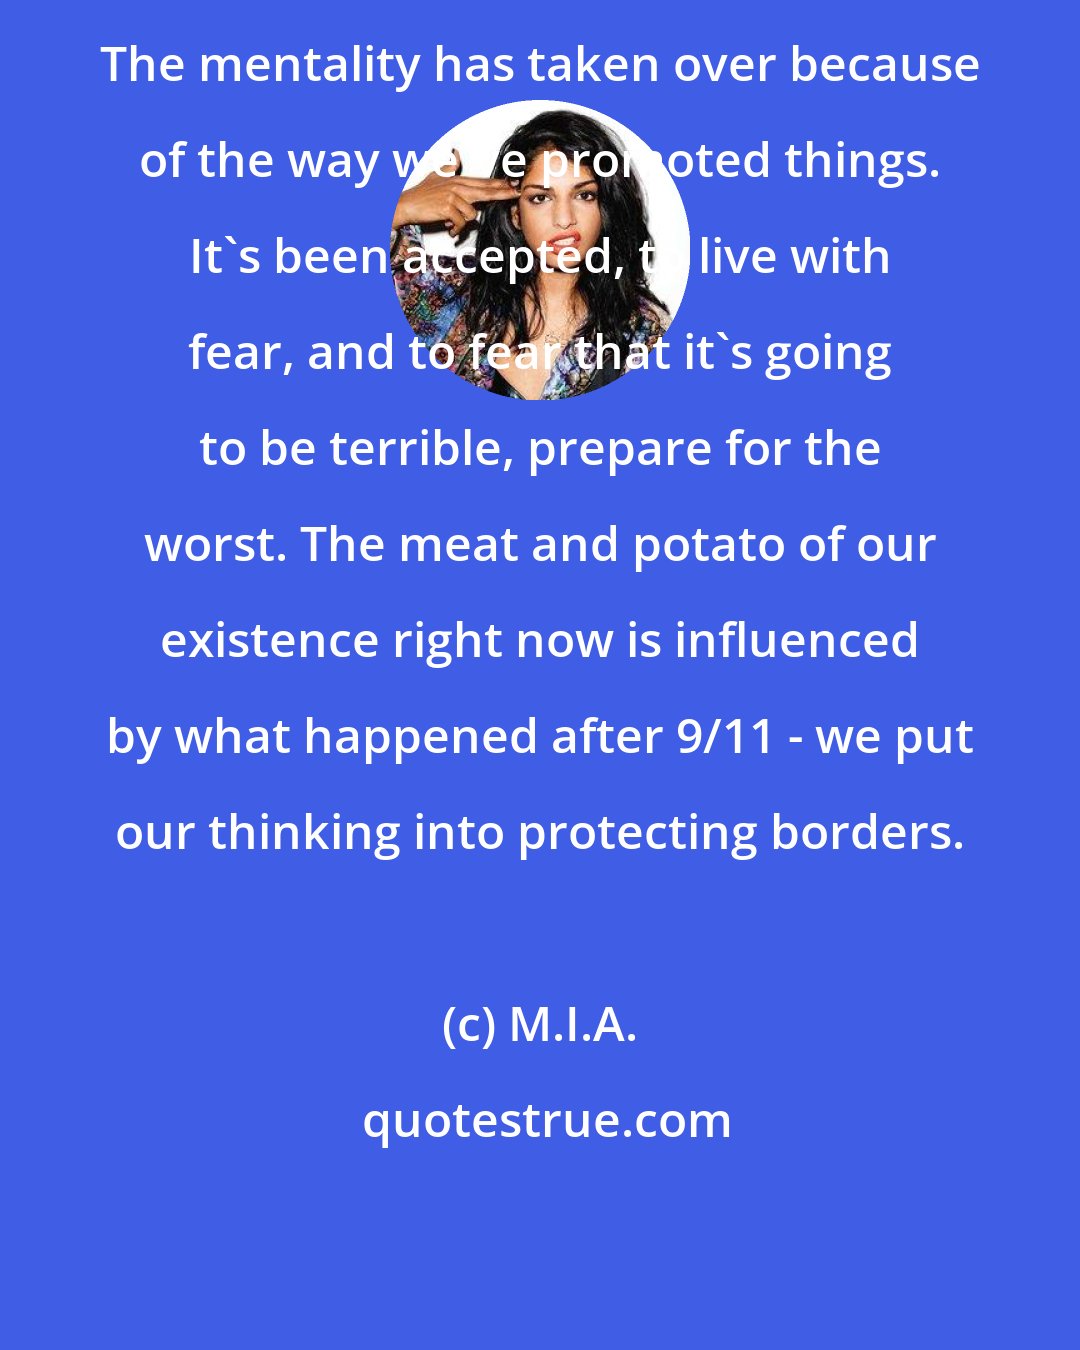 M.I.A.: The mentality has taken over because of the way we've promoted things. It's been accepted, to live with fear, and to fear that it's going to be terrible, prepare for the worst. The meat and potato of our existence right now is influenced by what happened after 9/11 - we put our thinking into protecting borders.